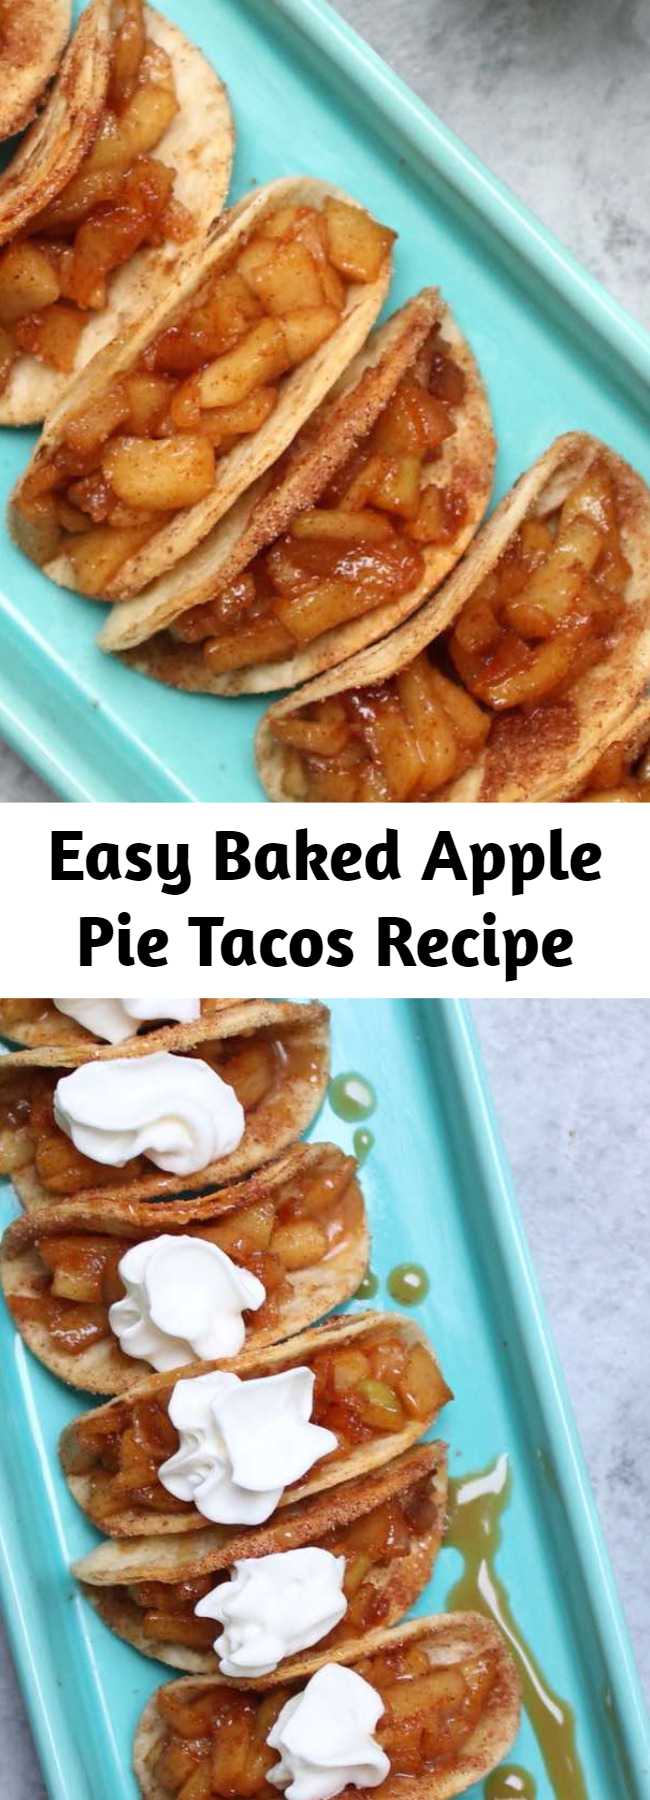 Easy Baked Apple Pie Tacos Recipe - These easy Apple Pie Tacos have a delicious cinnamon sugary apple filling in a crispy and sweet taco, drizzled with caramel sauce, and then topped with whipped cream! It’s the perfect way to serve apple pie to a crowd! Quick and easy recipe! 